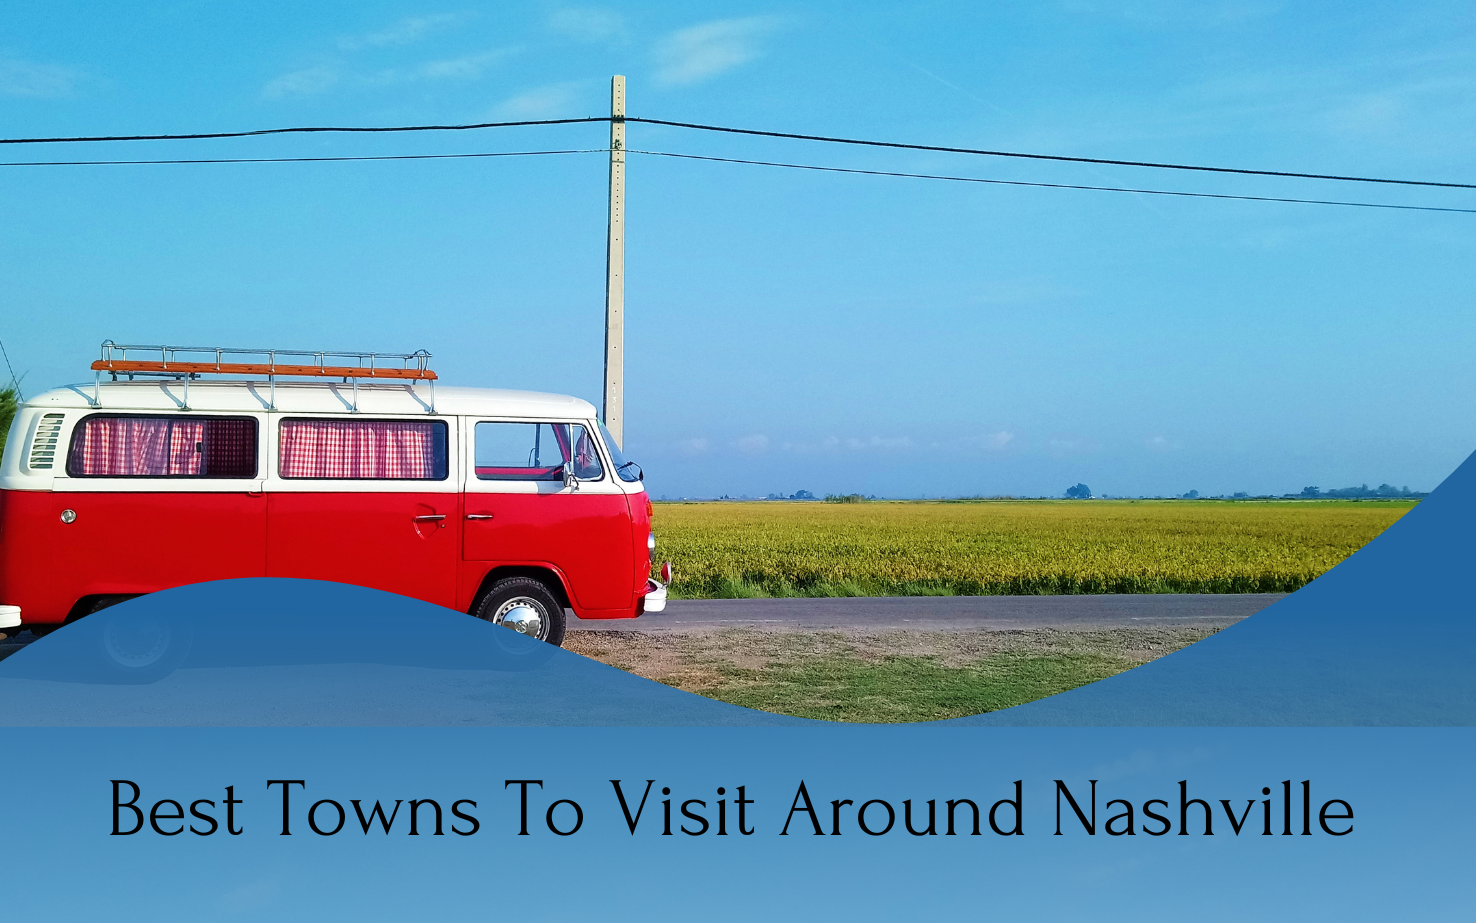 A red mini bus onthe road and a written text of "Best Towns To Visit Around Nashville".